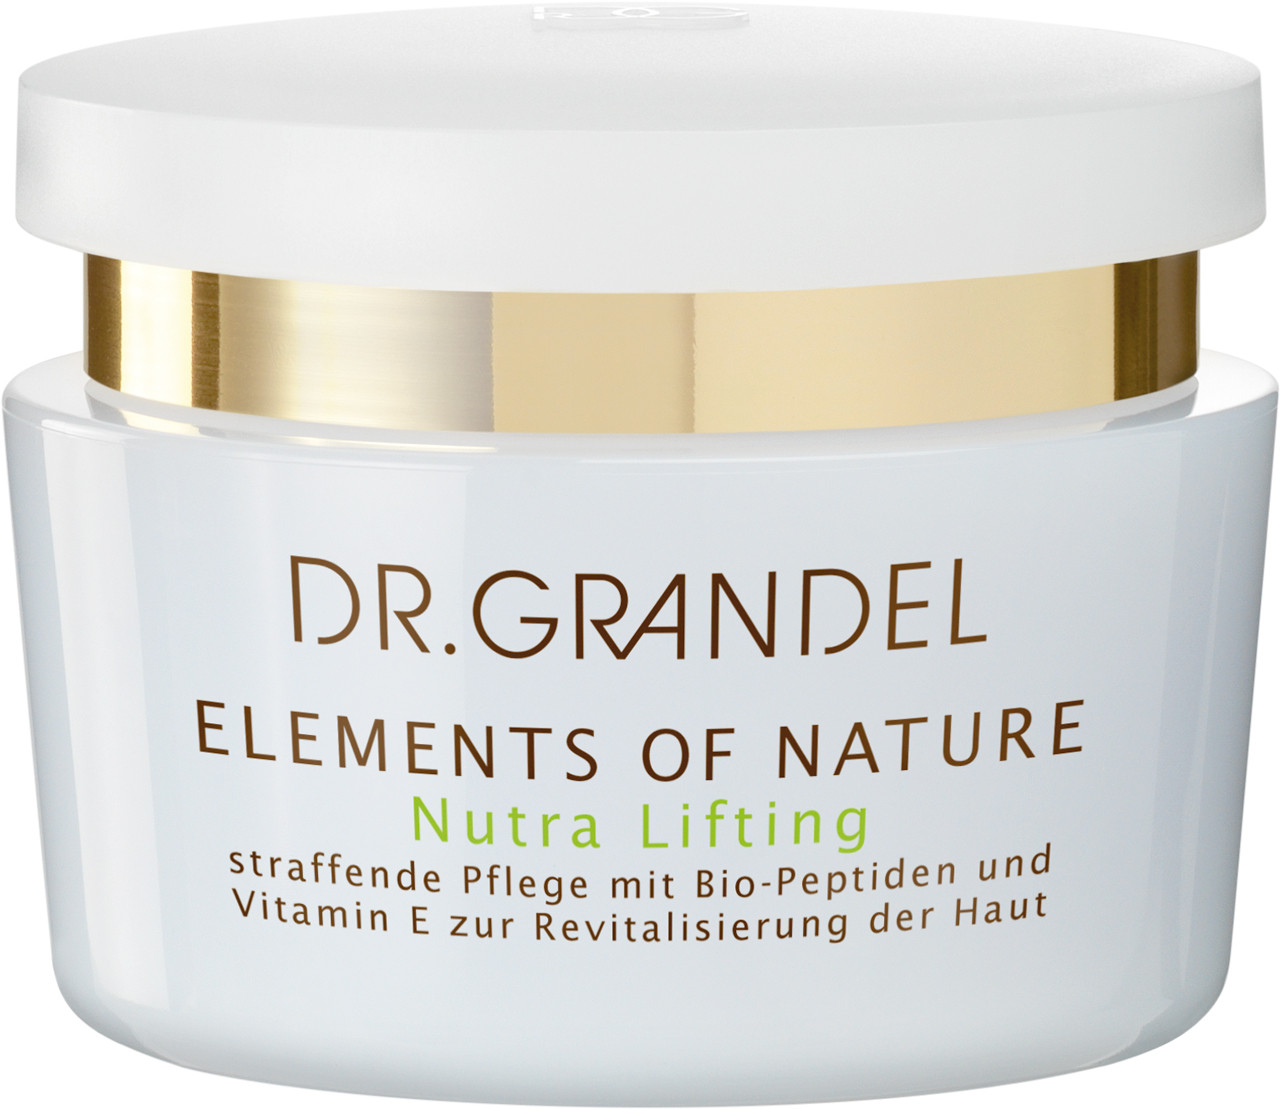 DR. GRANDEL Elements Of Nature Nutra Lifting, 50ml, Retail